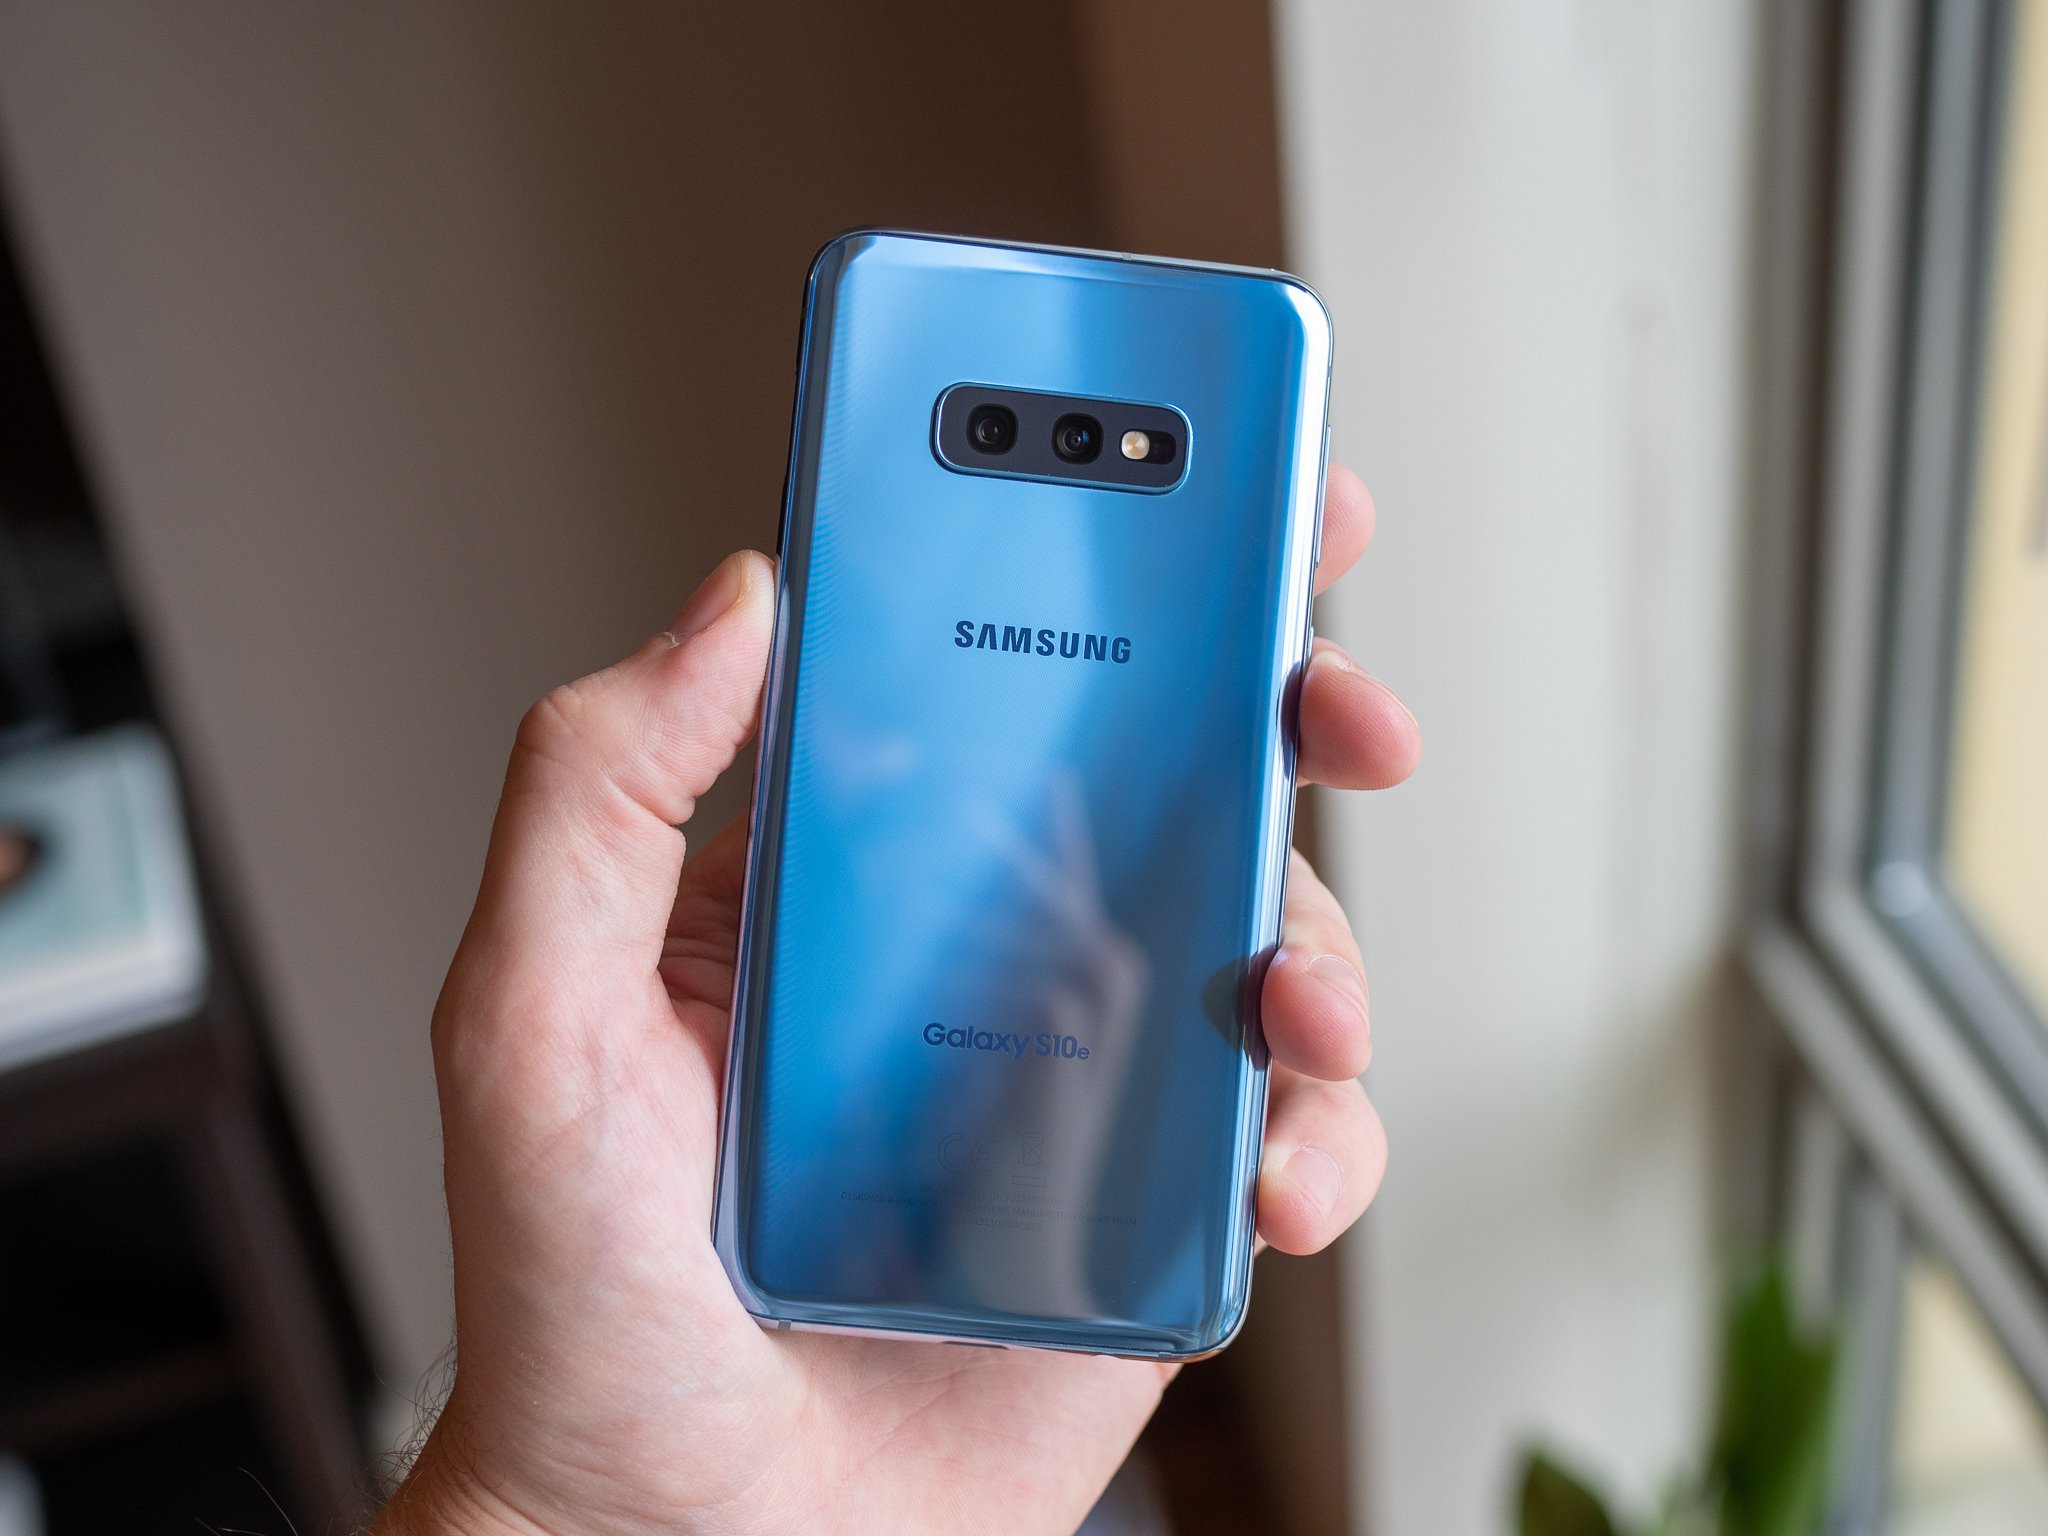 Samsung Galaxy S10e Vs Oneplus 6t Which Should You Buy Android Central